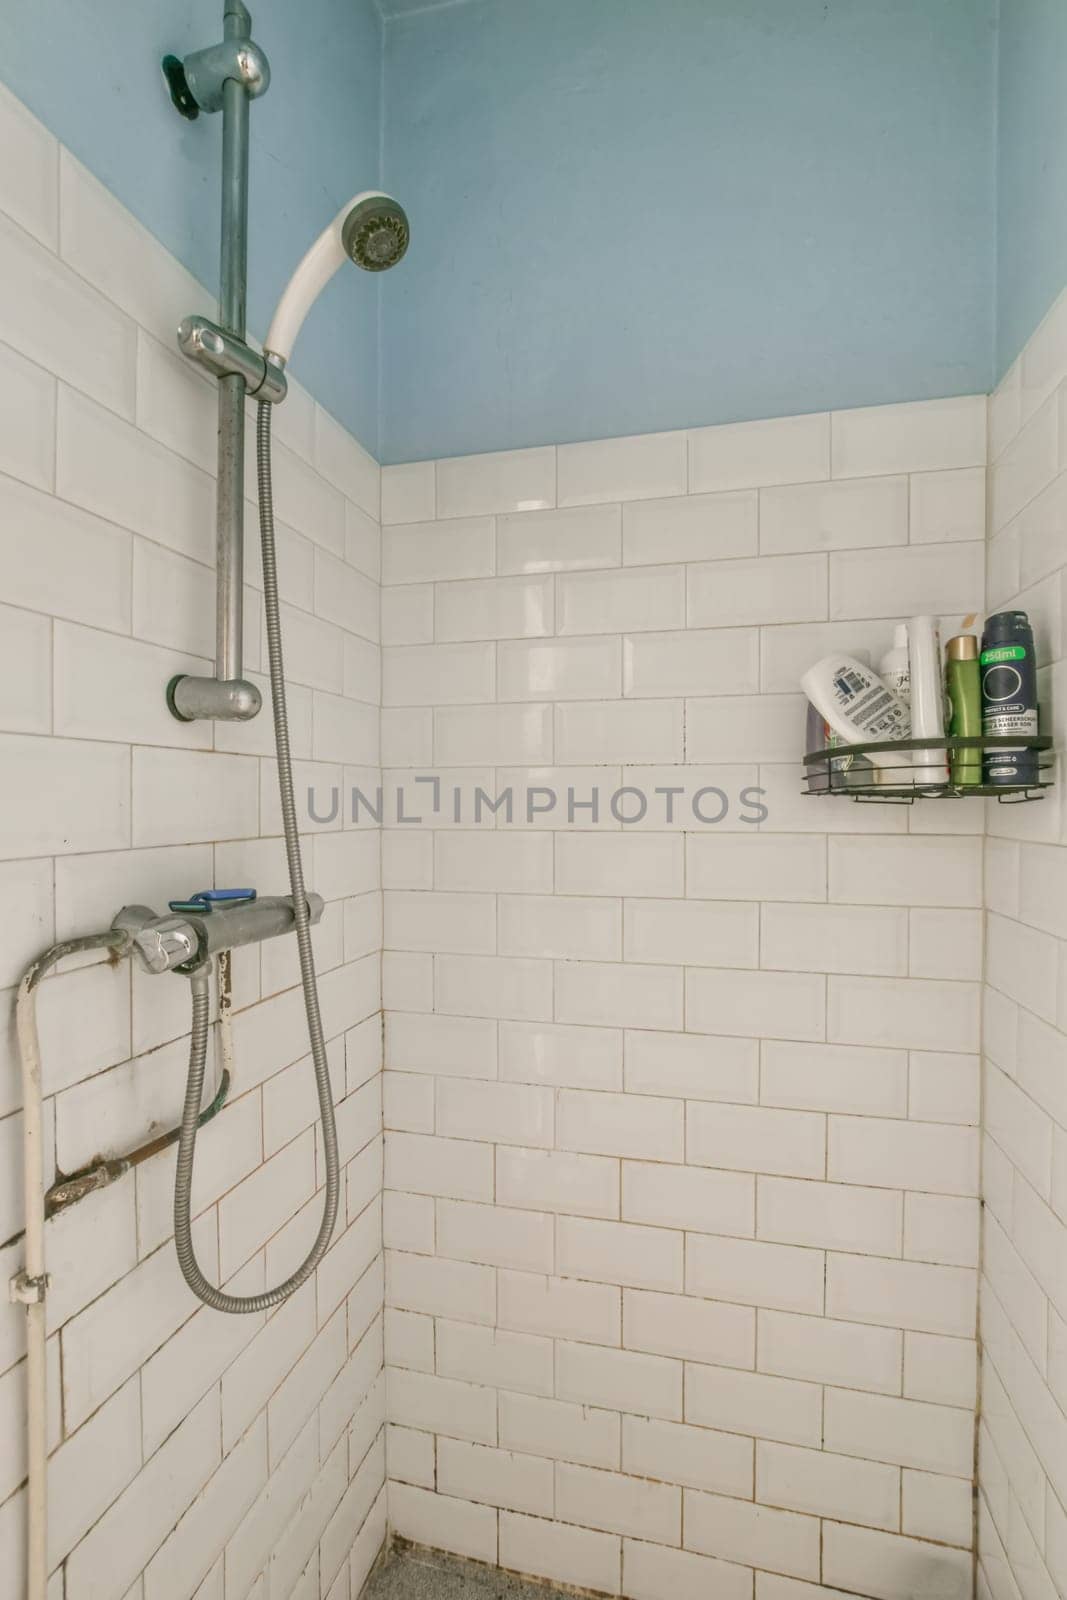 a bathroom with white tiles on the walls, and a shower head mounted to the wall next to the tub